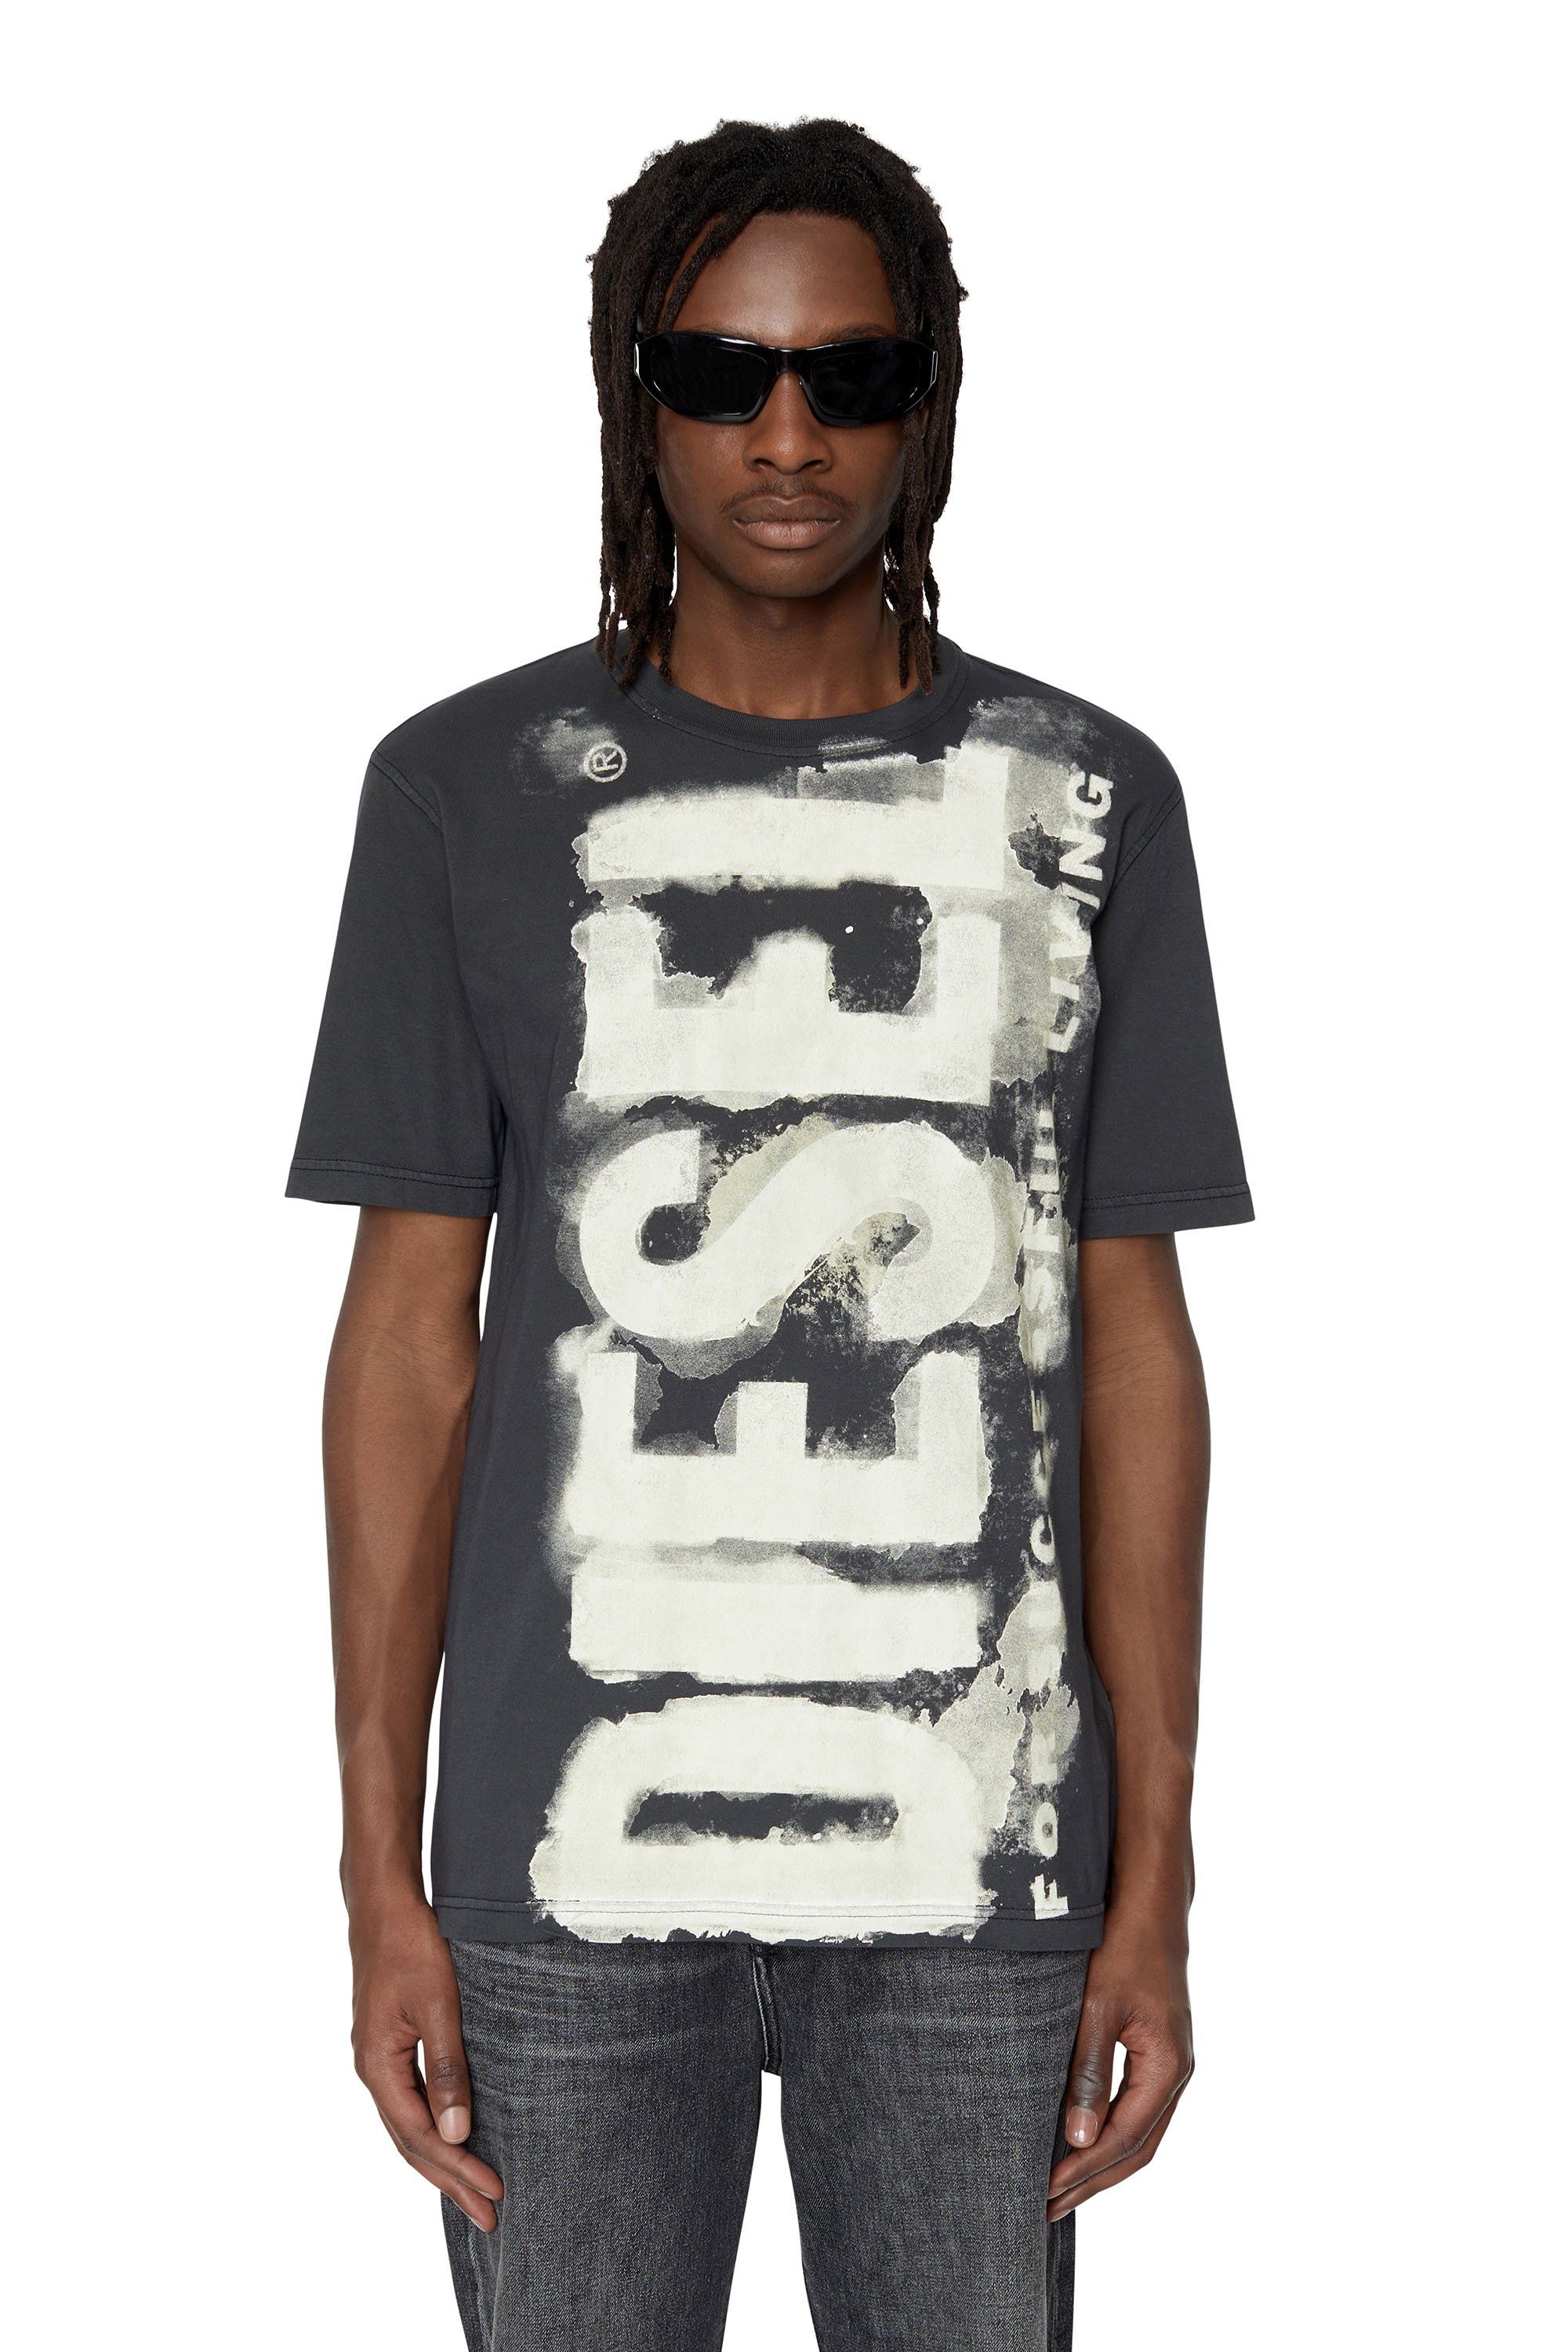 Diesel - T-JUST-E16, Gris oscuro - Image 1